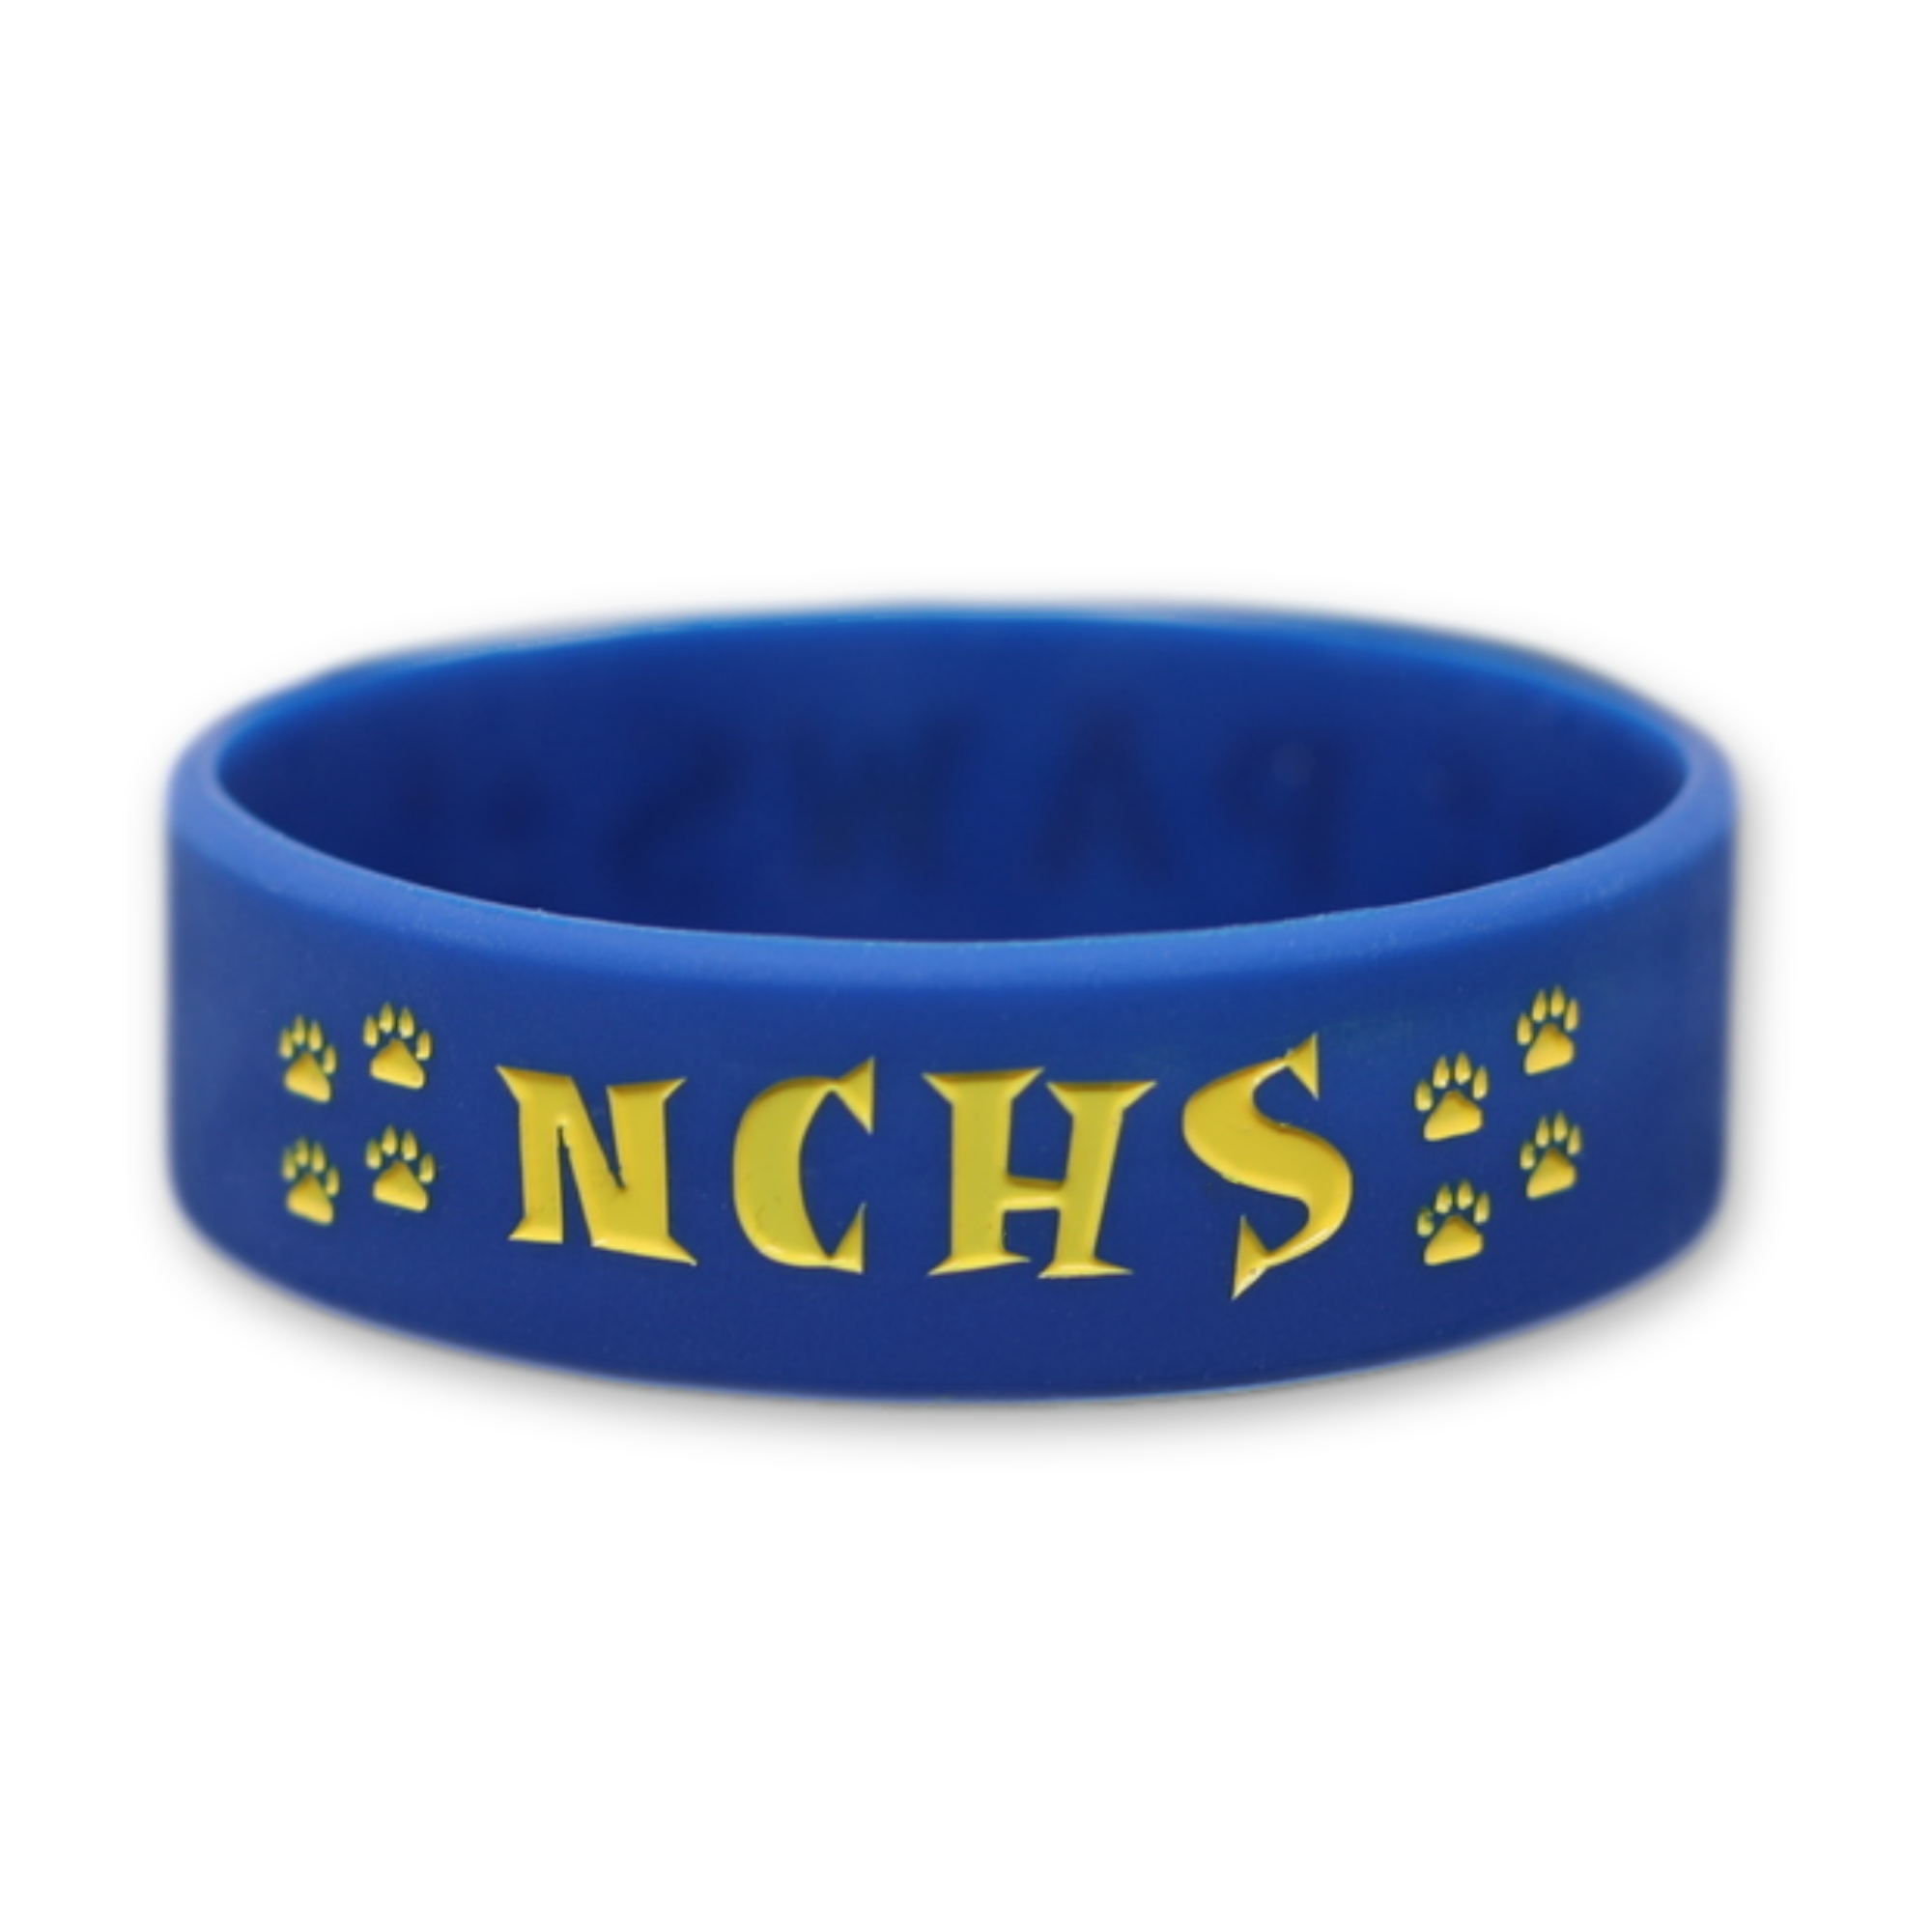 Blue and Yellow Class Wristband